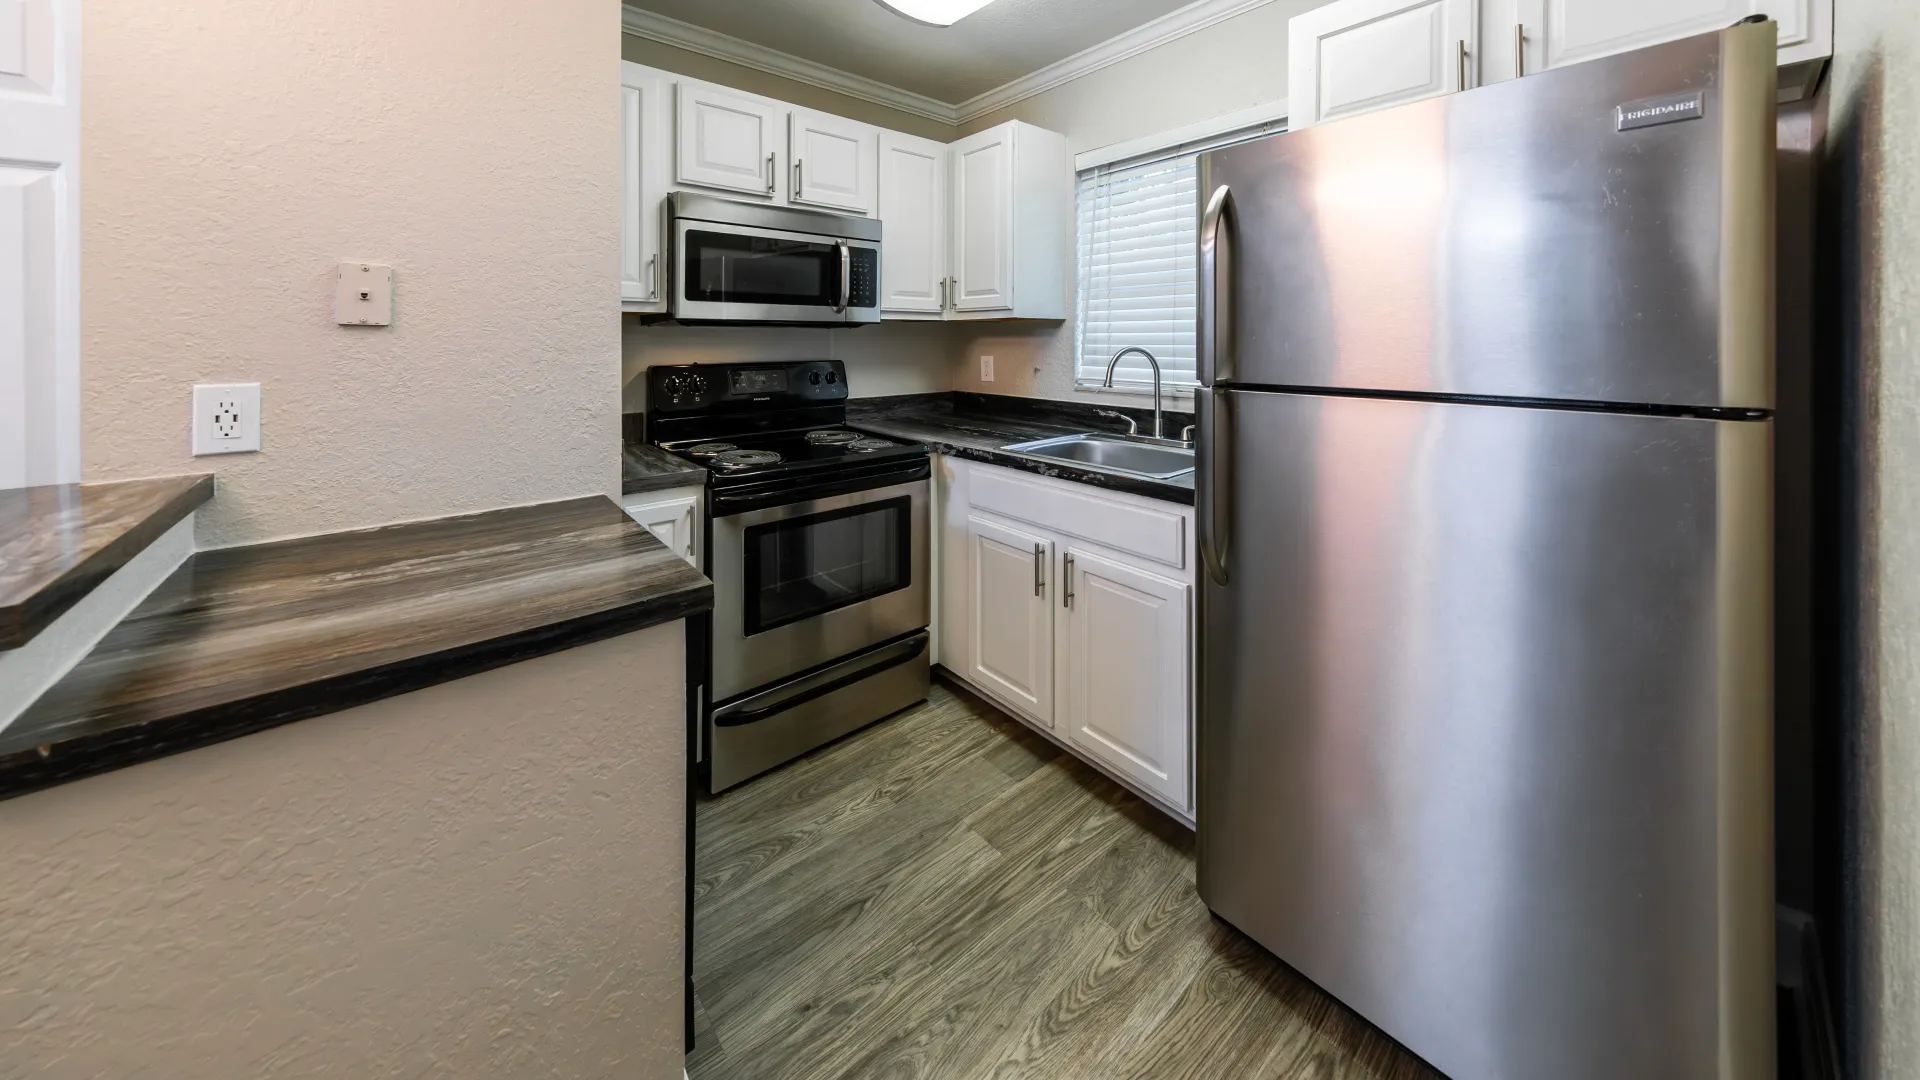 A cozy kitchen featuring stainless-steel appliances, including a gleaming refrigerator, above-stove mounted microwave, and dishwasher, accompanied by black fusion countertops and a convenient USB outlet.